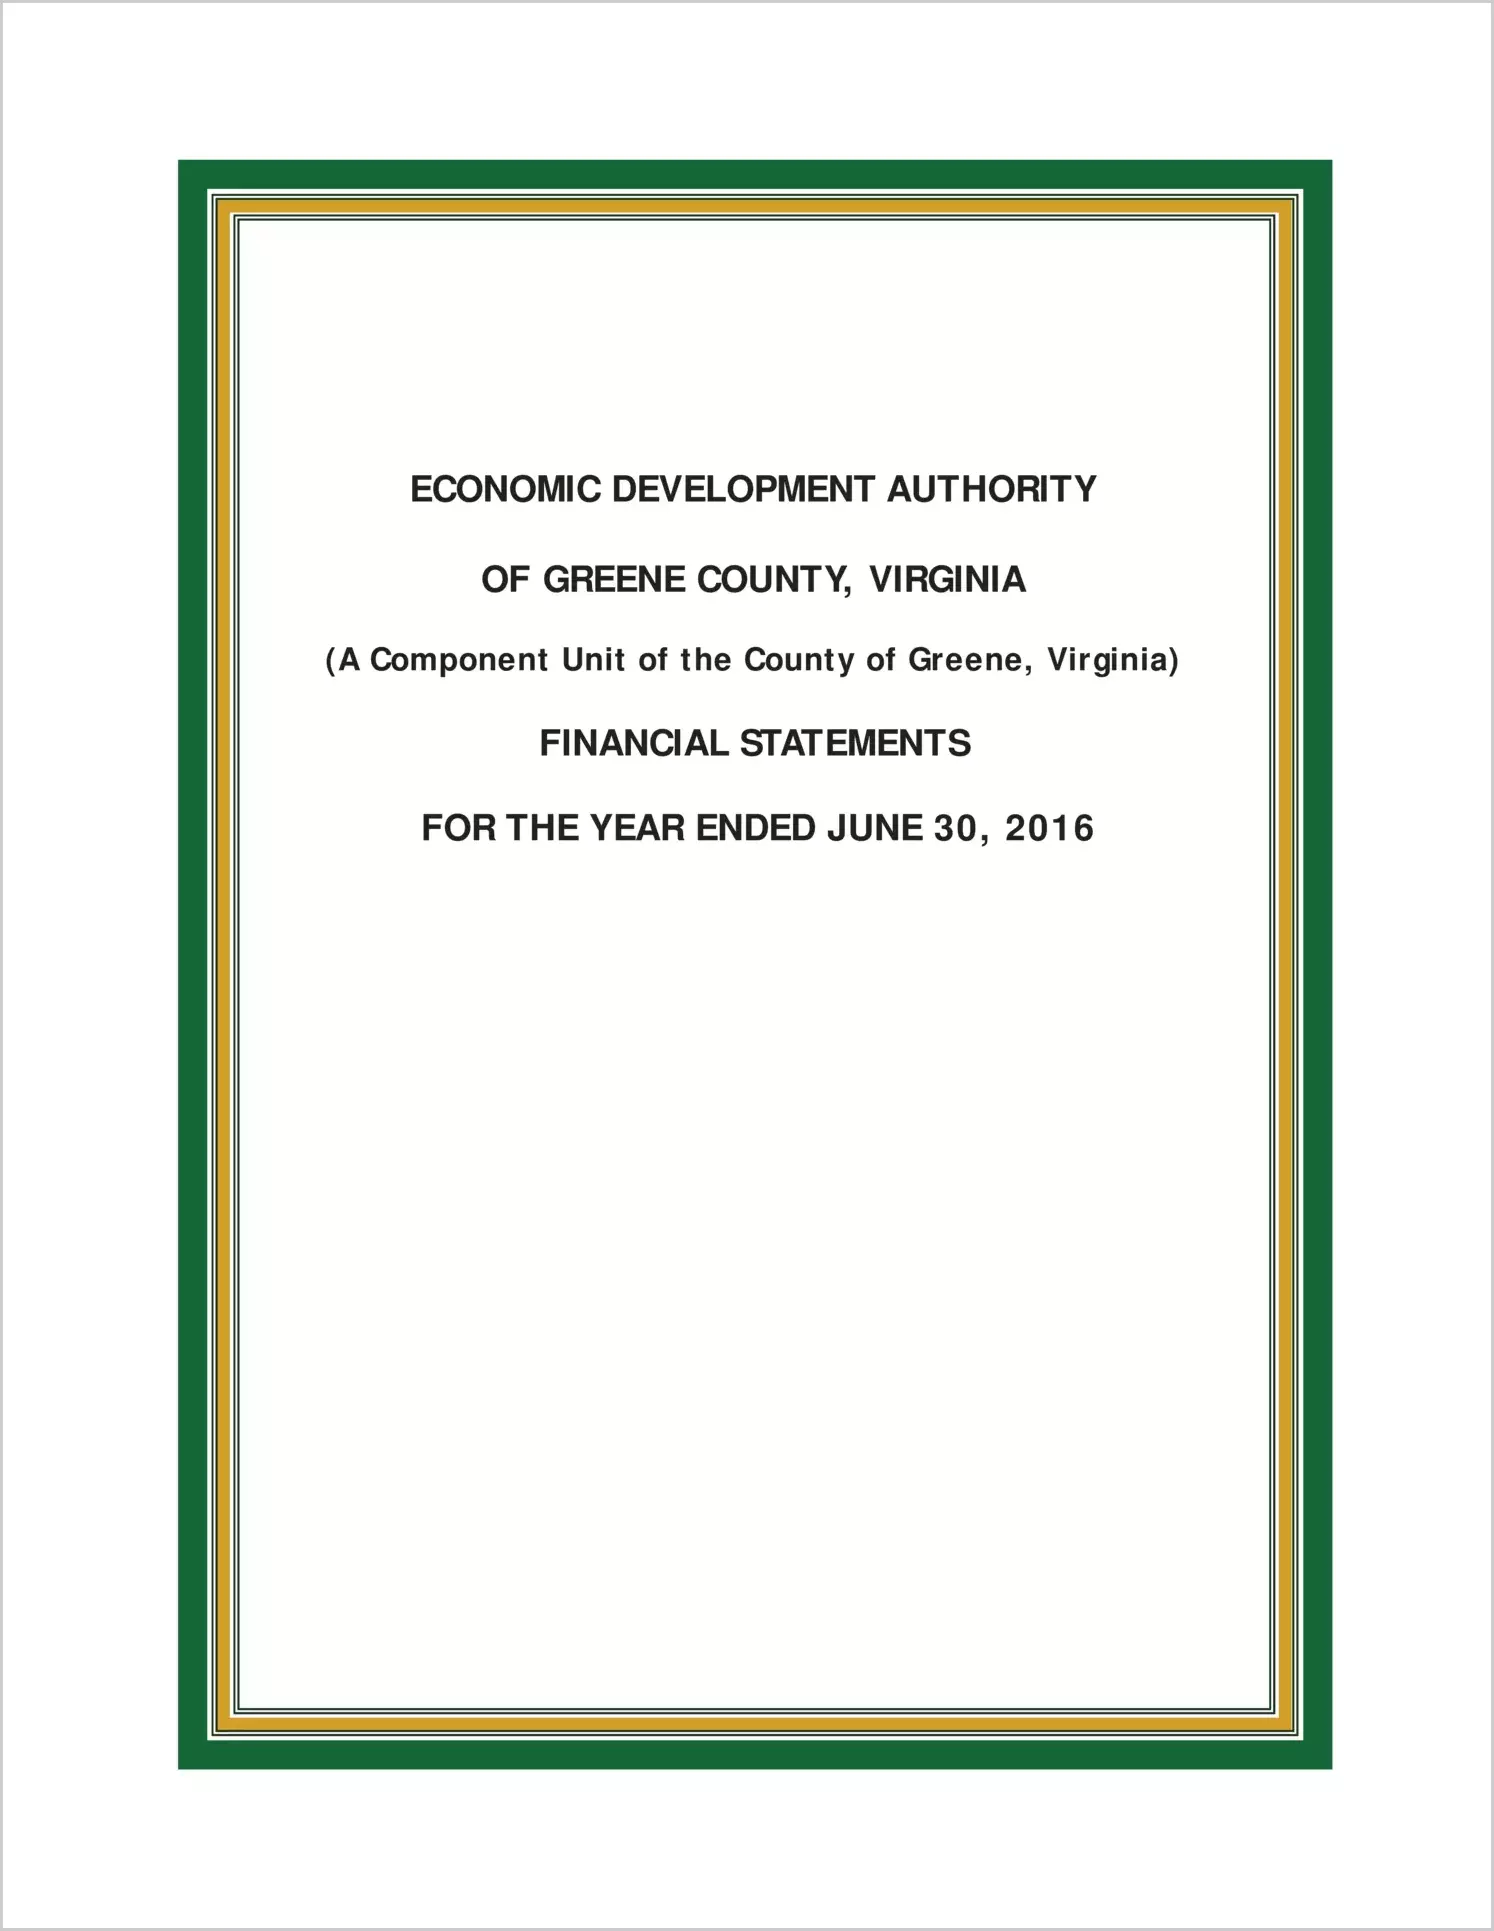 2016 ABC/Other Annual Financial Report  for Greene Economic Development Authority